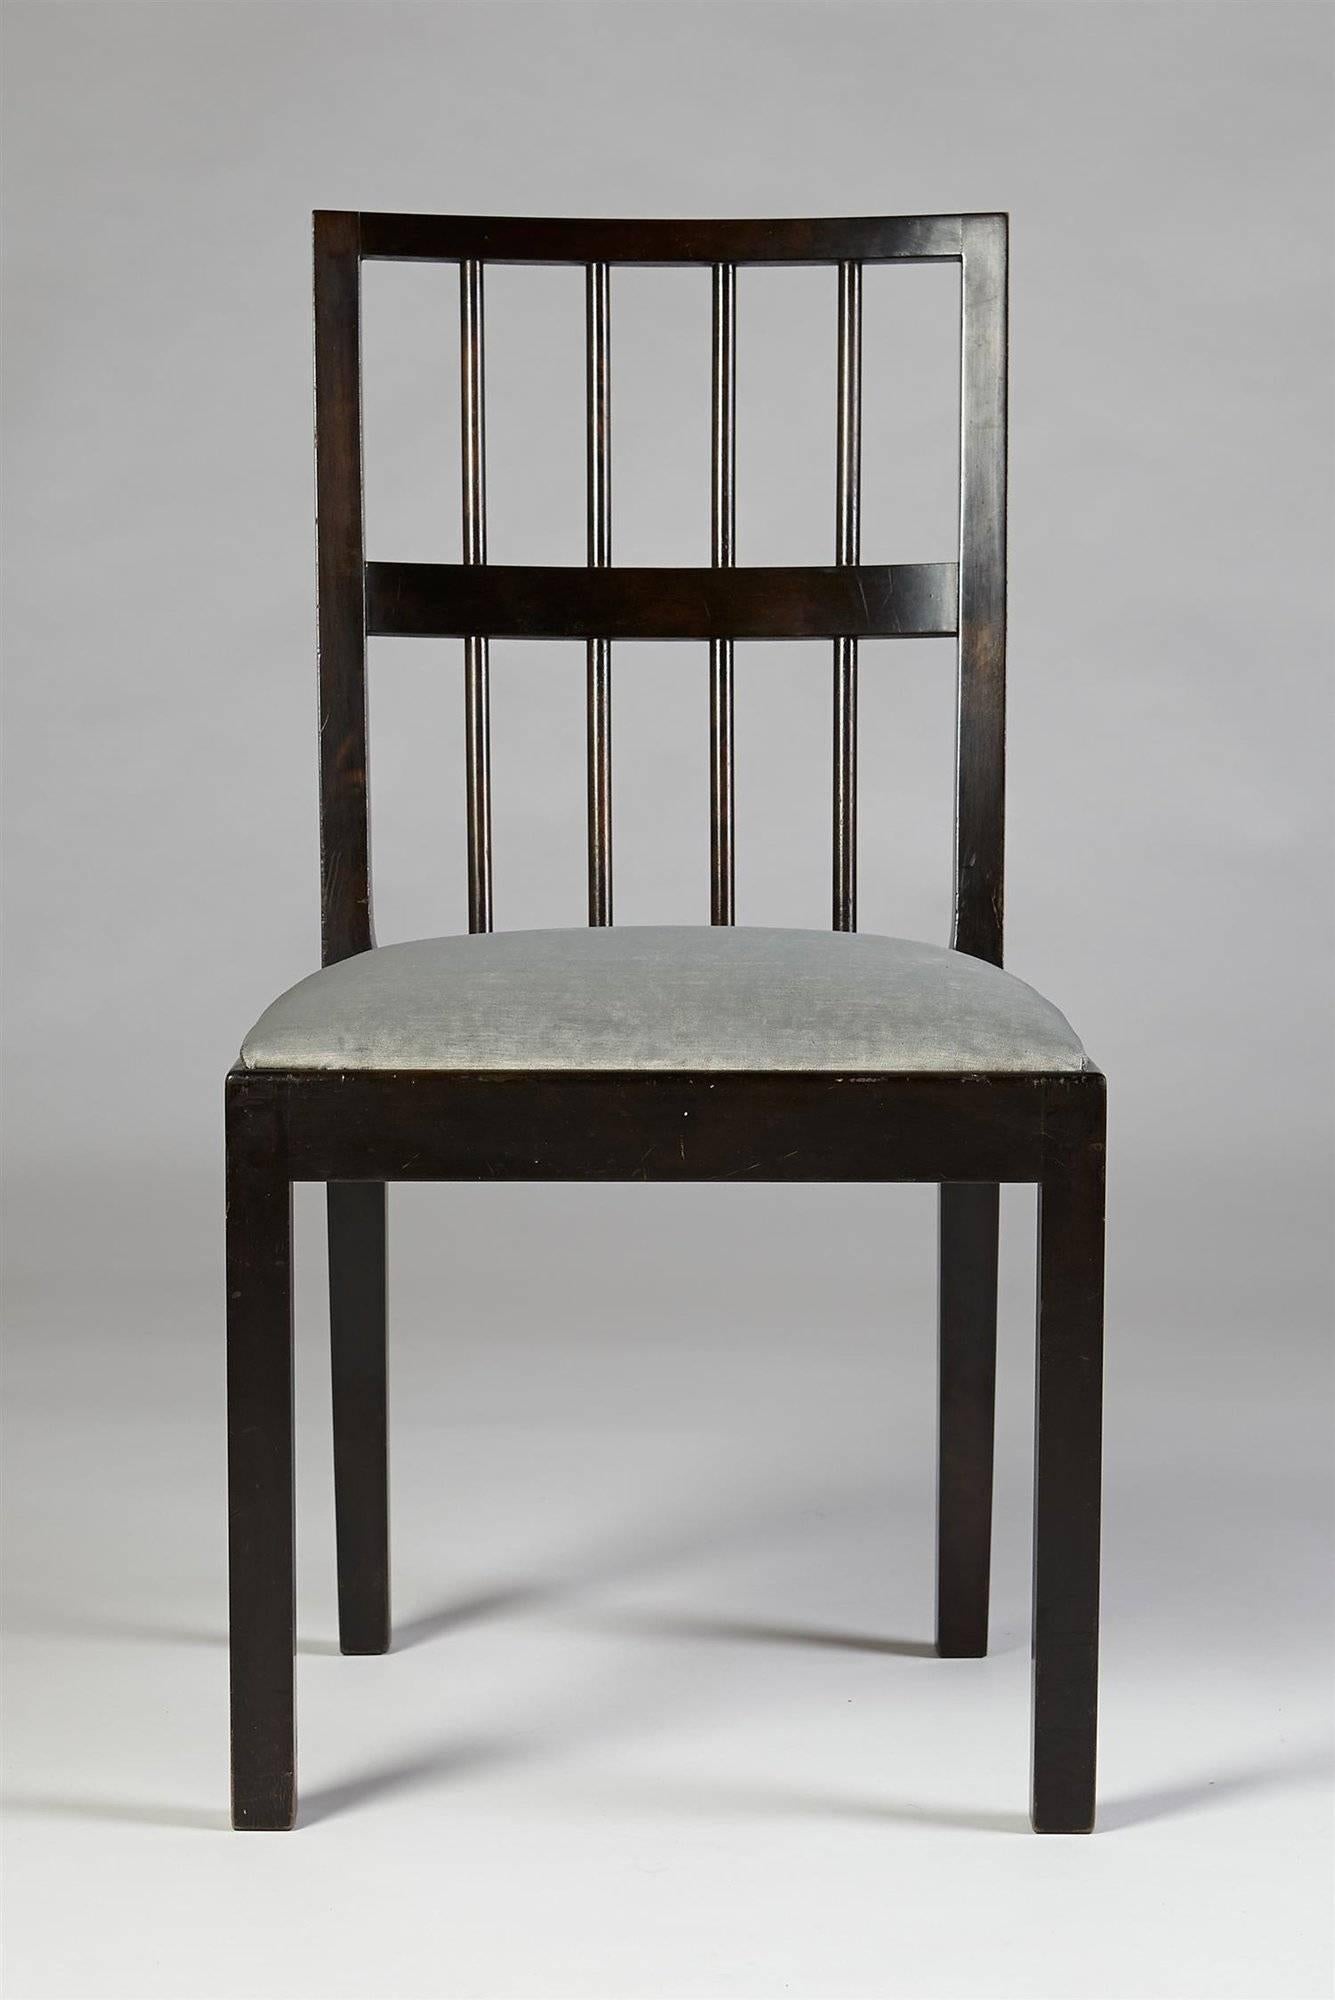 Velvet Set of Four Chairs, Designed by Axel Einar Hjorth for NK, Sweden, 1930s